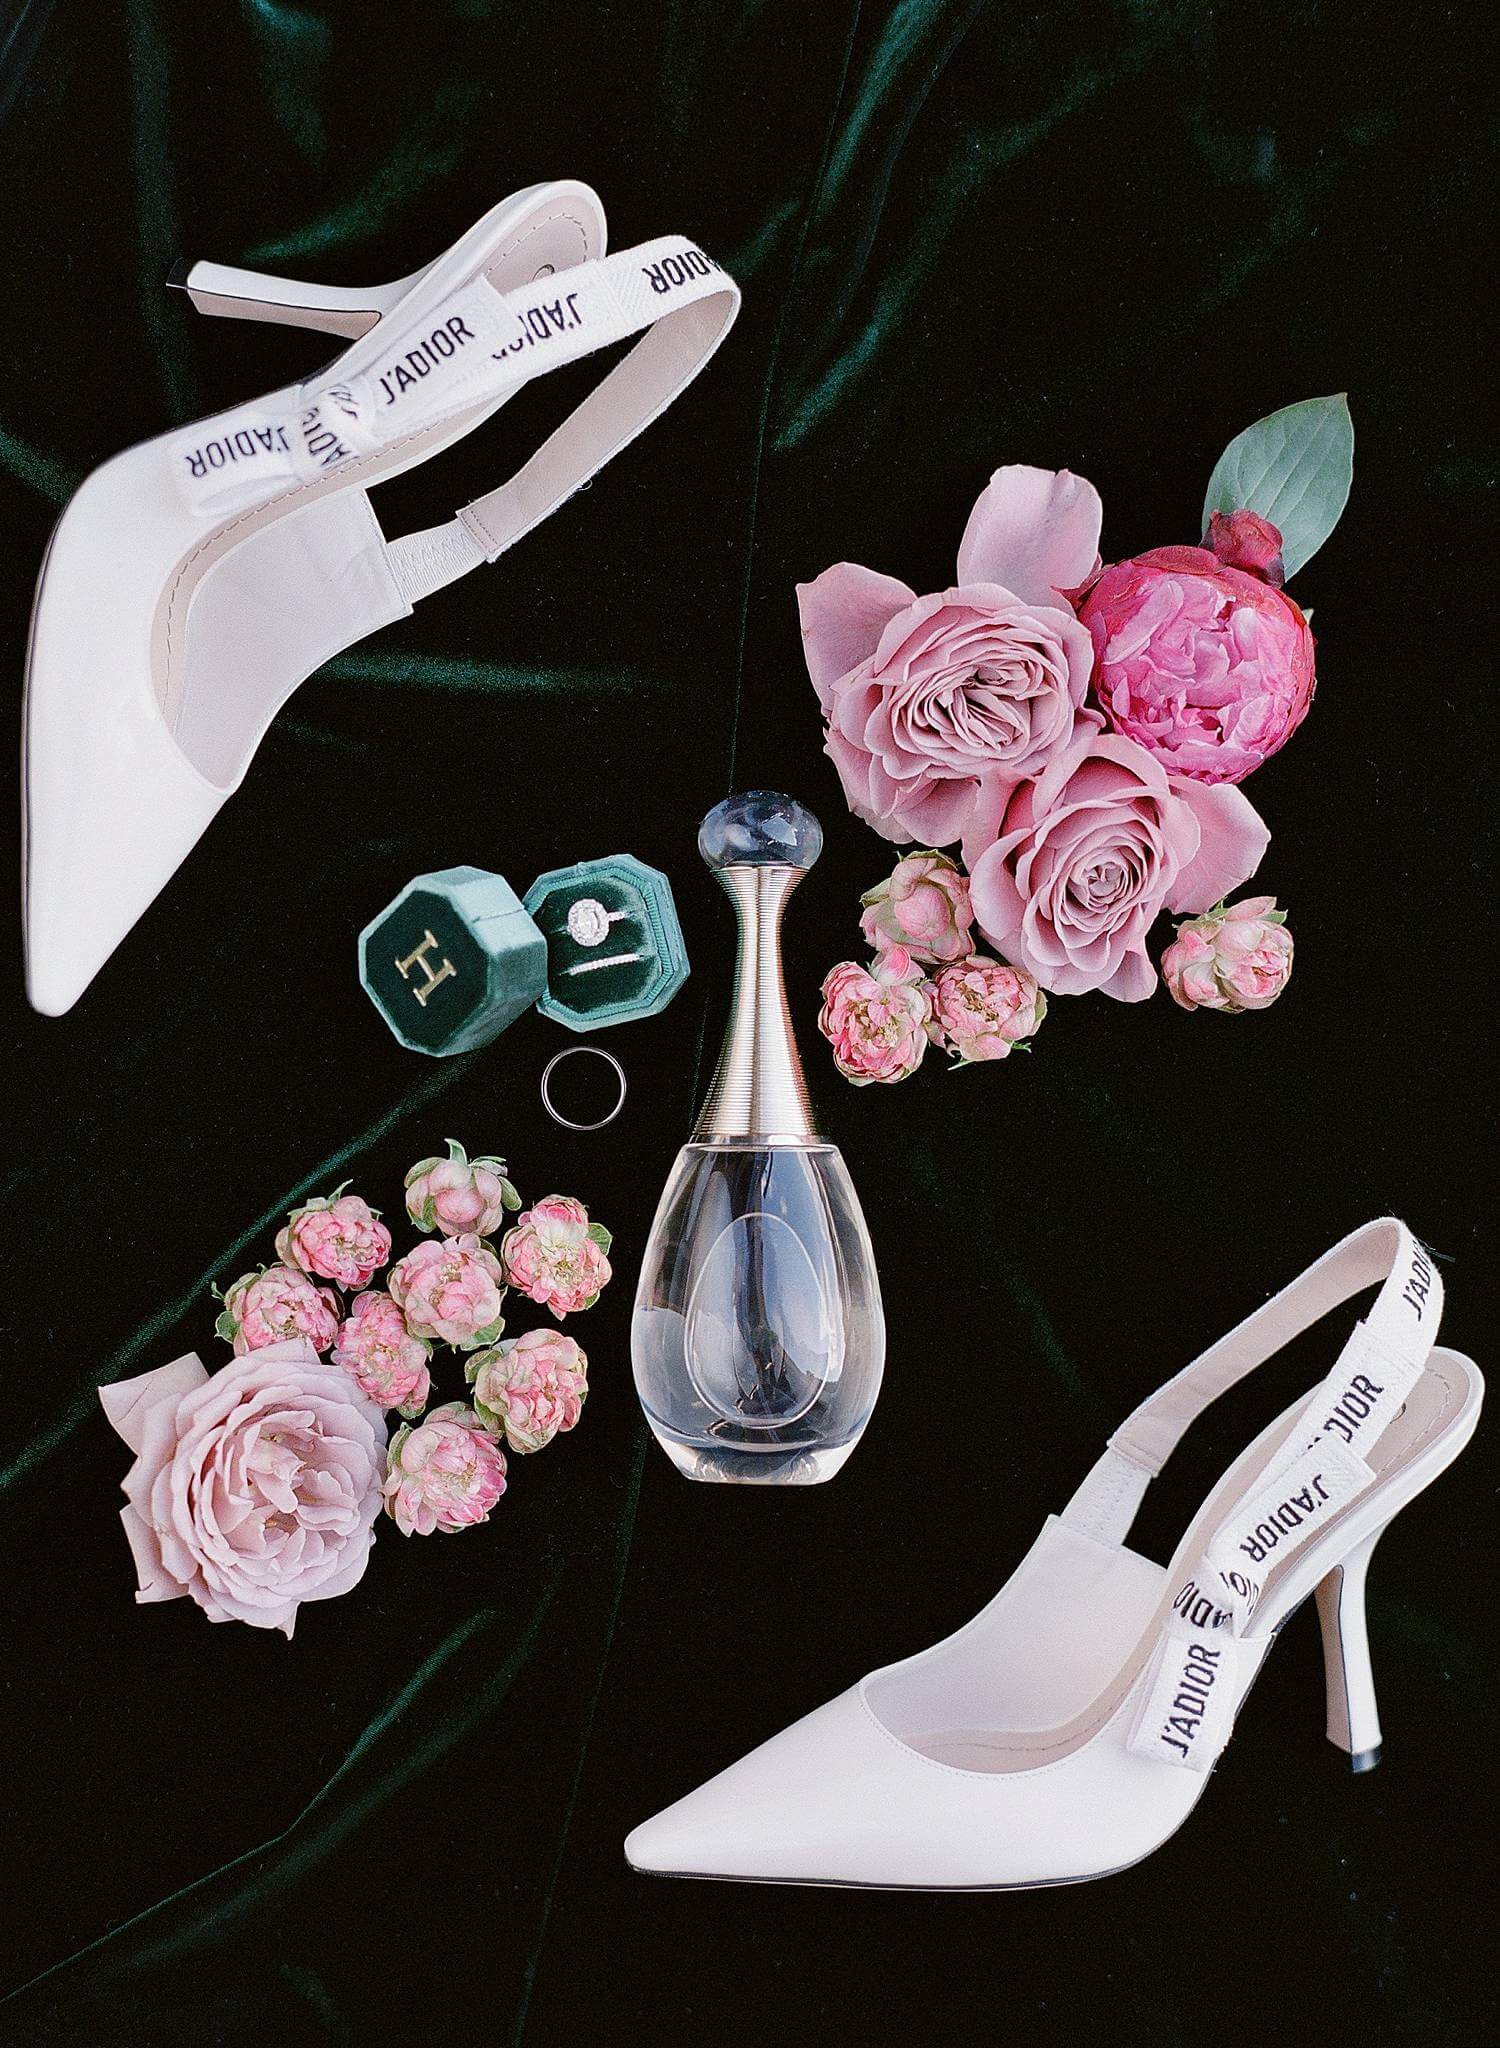 Dior perfume and heels with wedding bands and florals on green velvet.